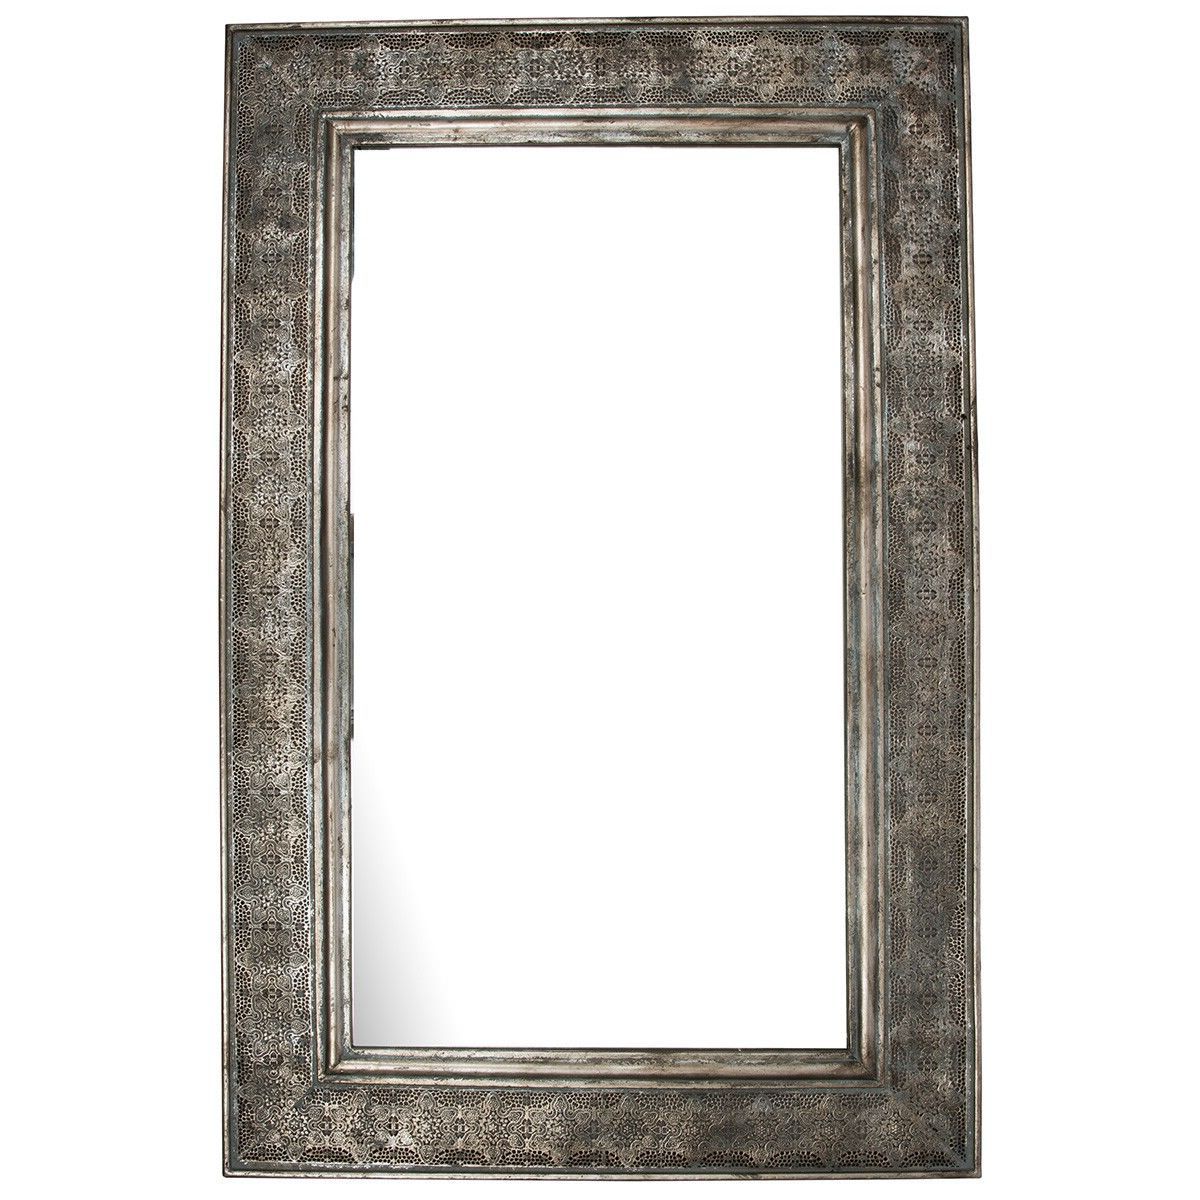 Brass Iron Framed Wall Mirrors Intended For Most Current Miers Cutout Metal Frame Rectangular Wall Mirror, 123cm, Patina Silver (View 11 of 15)